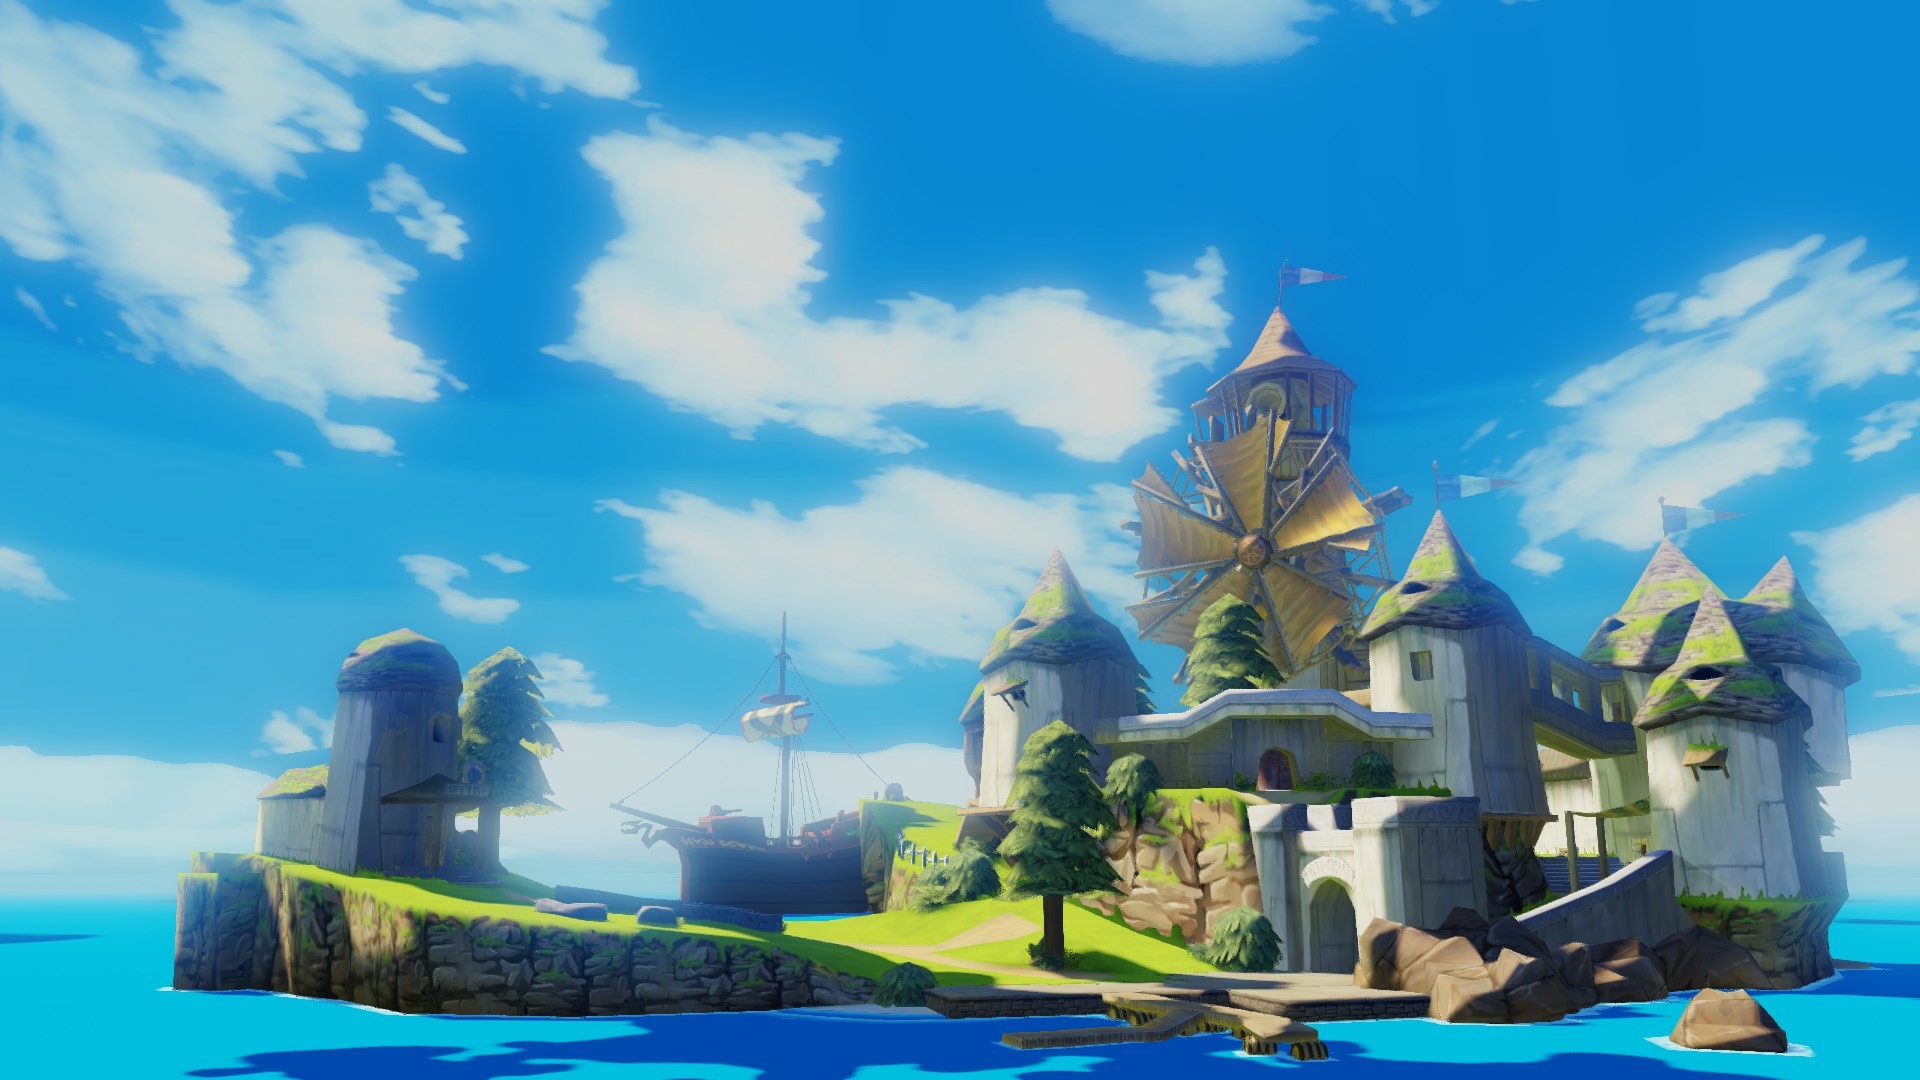 1920x1080 Widescreen Wallpapers: the legend of zelda the wind waker hd pic (Wymund  Nash-